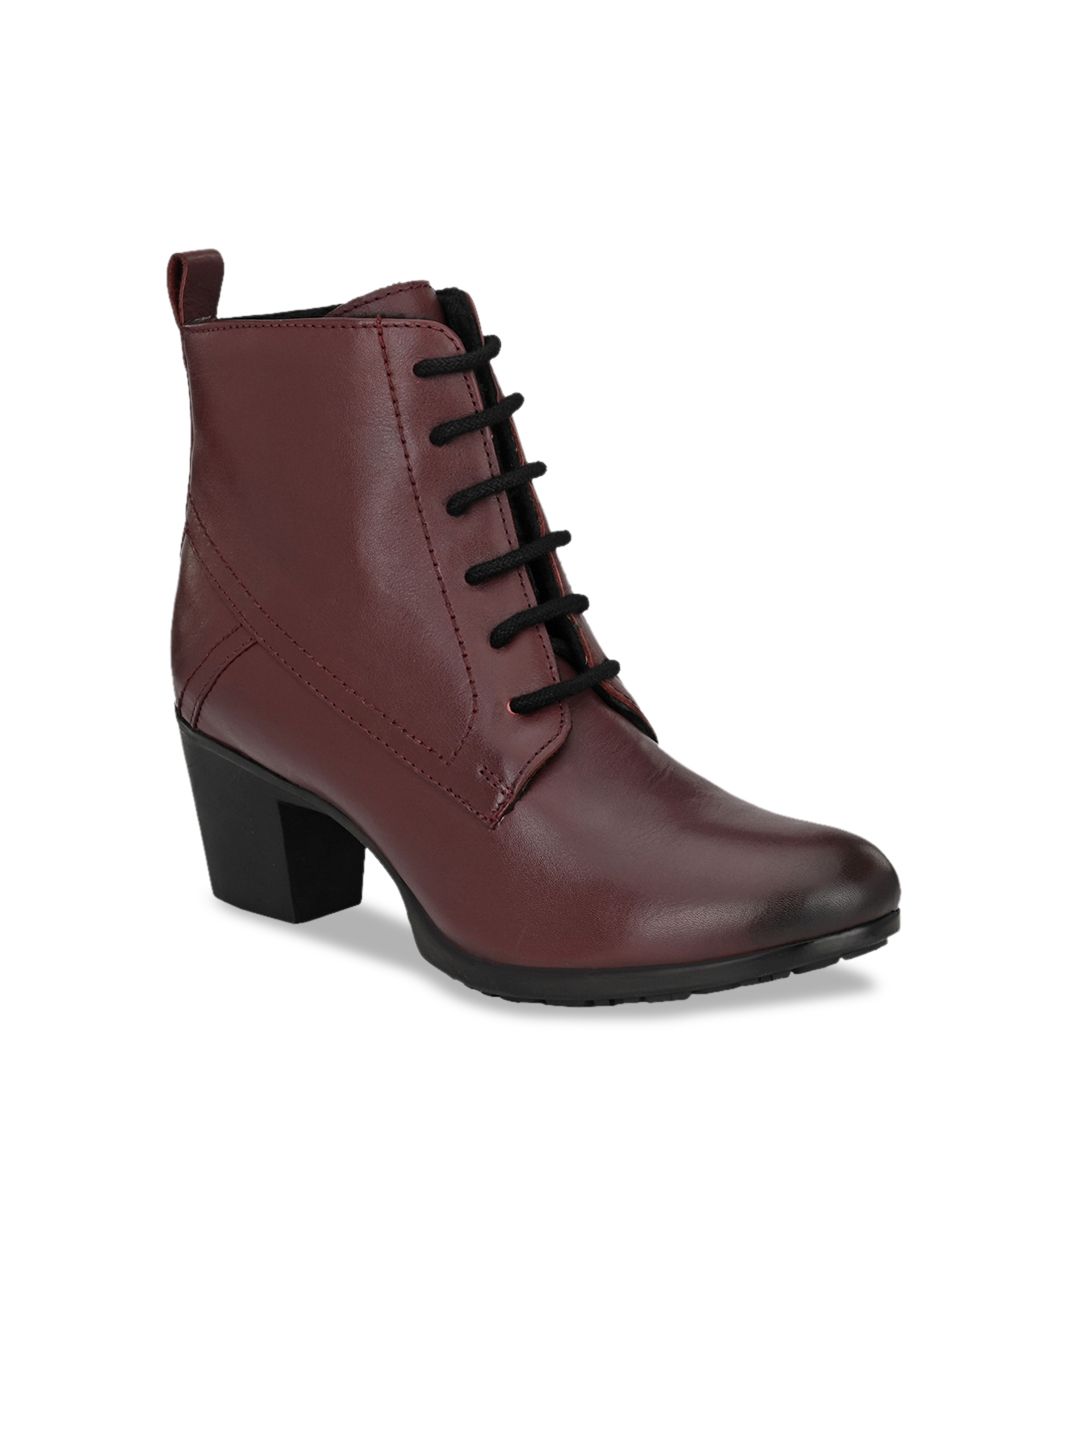 Delize Women Burgundy Solid Leather Mid-Top Block Heeled Boots Price in India